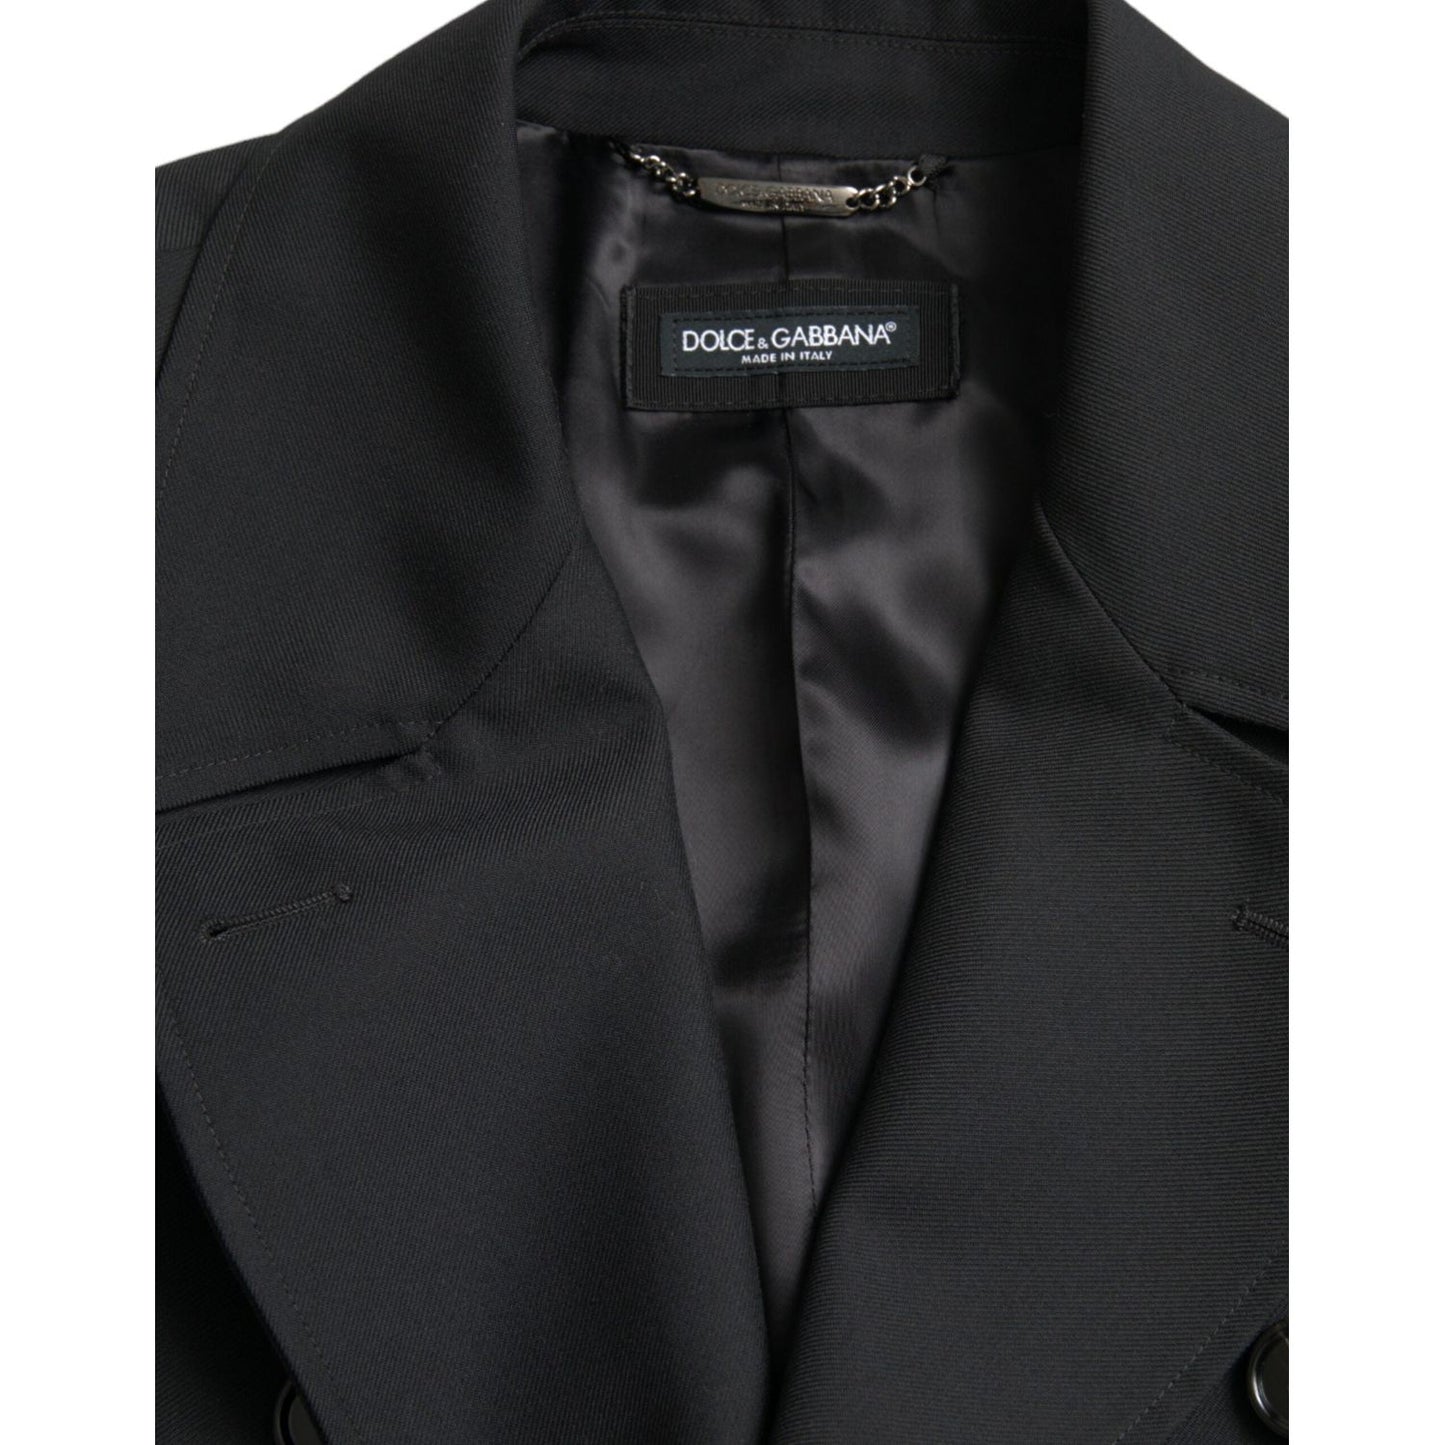 Dolce & Gabbana Black Double Breasted Trench Coat Jacket black-double-breasted-trench-coat-jacket